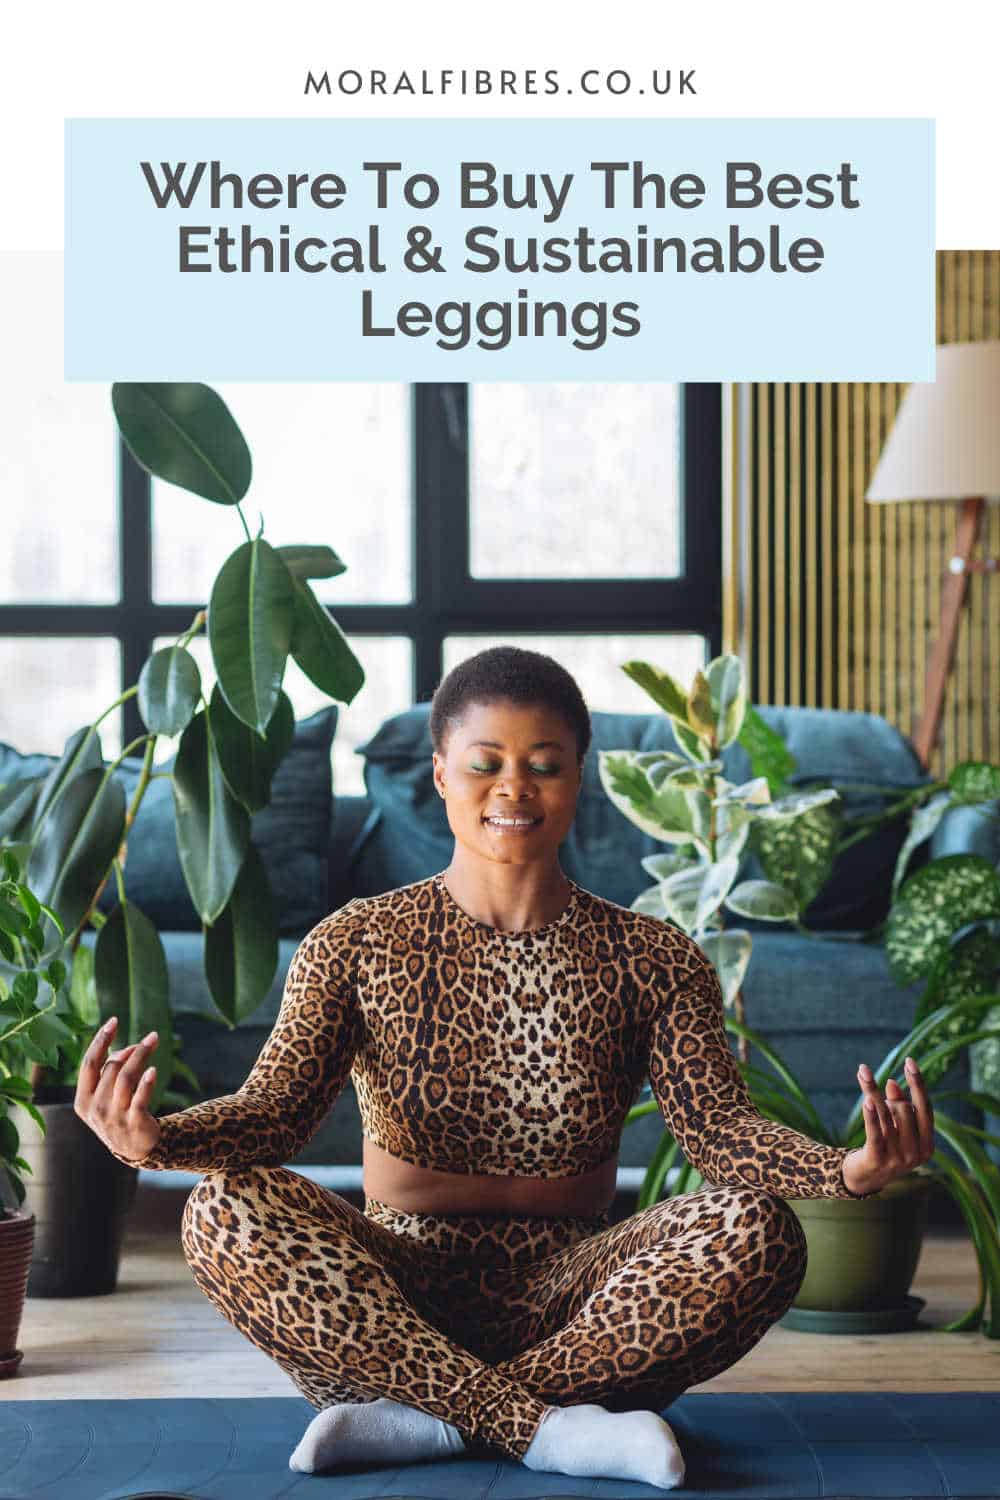 Where to Buy the Best Ethical Leggings In The UK - Moral Fibres